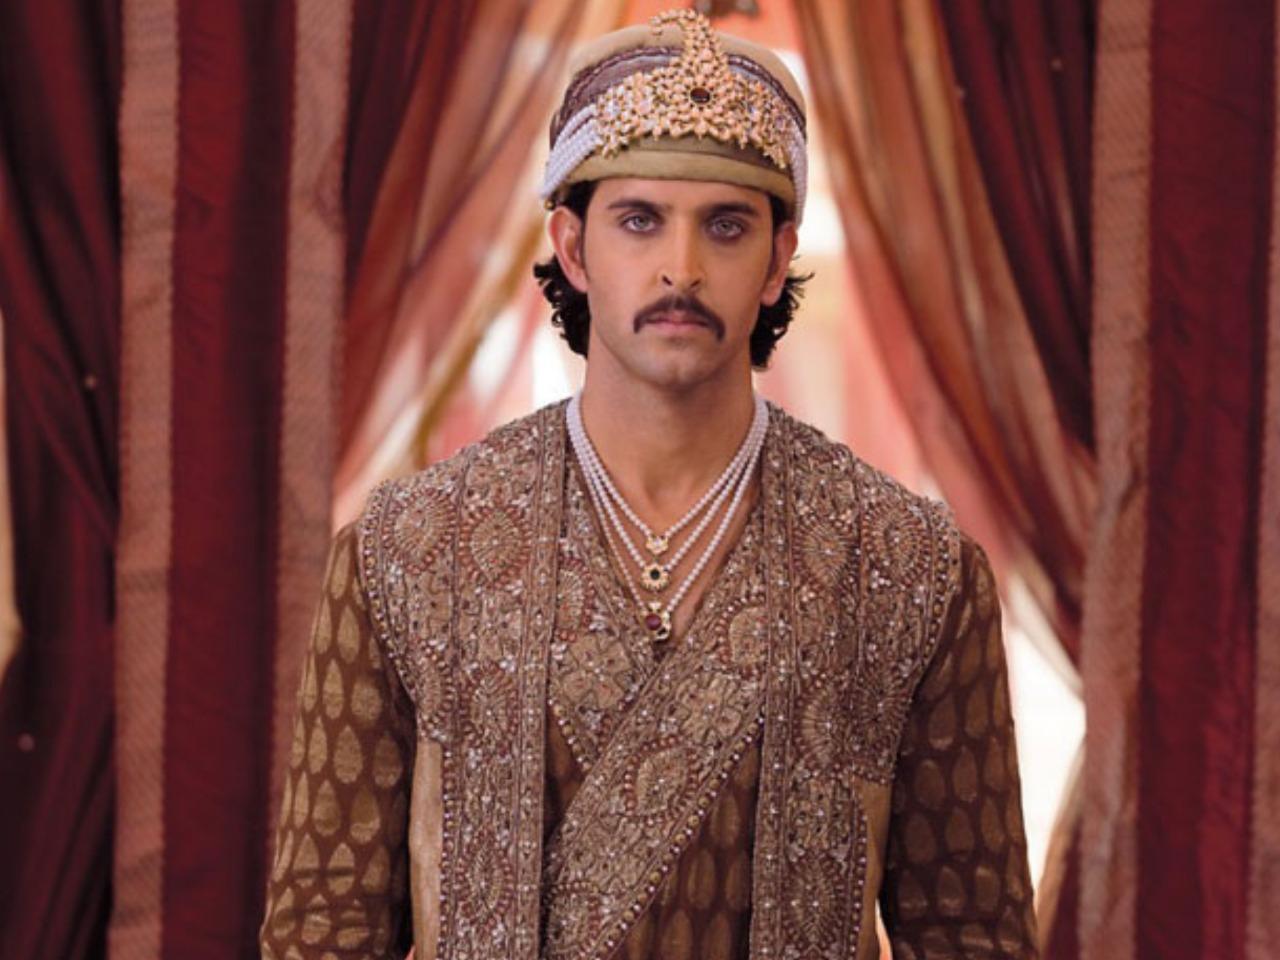 Akbar in Jodhaa Akbar (2008)
This was Hrithik's first period drama. This is a role that not many might have envisioned the actor in considering his six pack abs, smooth dance moves that would have easily stereotyped him into urban characters. But the actor brought out the charisma and aura that Emperor Akbar is known for in the film directed by Ashutosh Gowariker. The film that focused on the story between Akbar and Jodhaa was well received by the audience and the music by A.R. Rahman only eleveated the films nd the performances